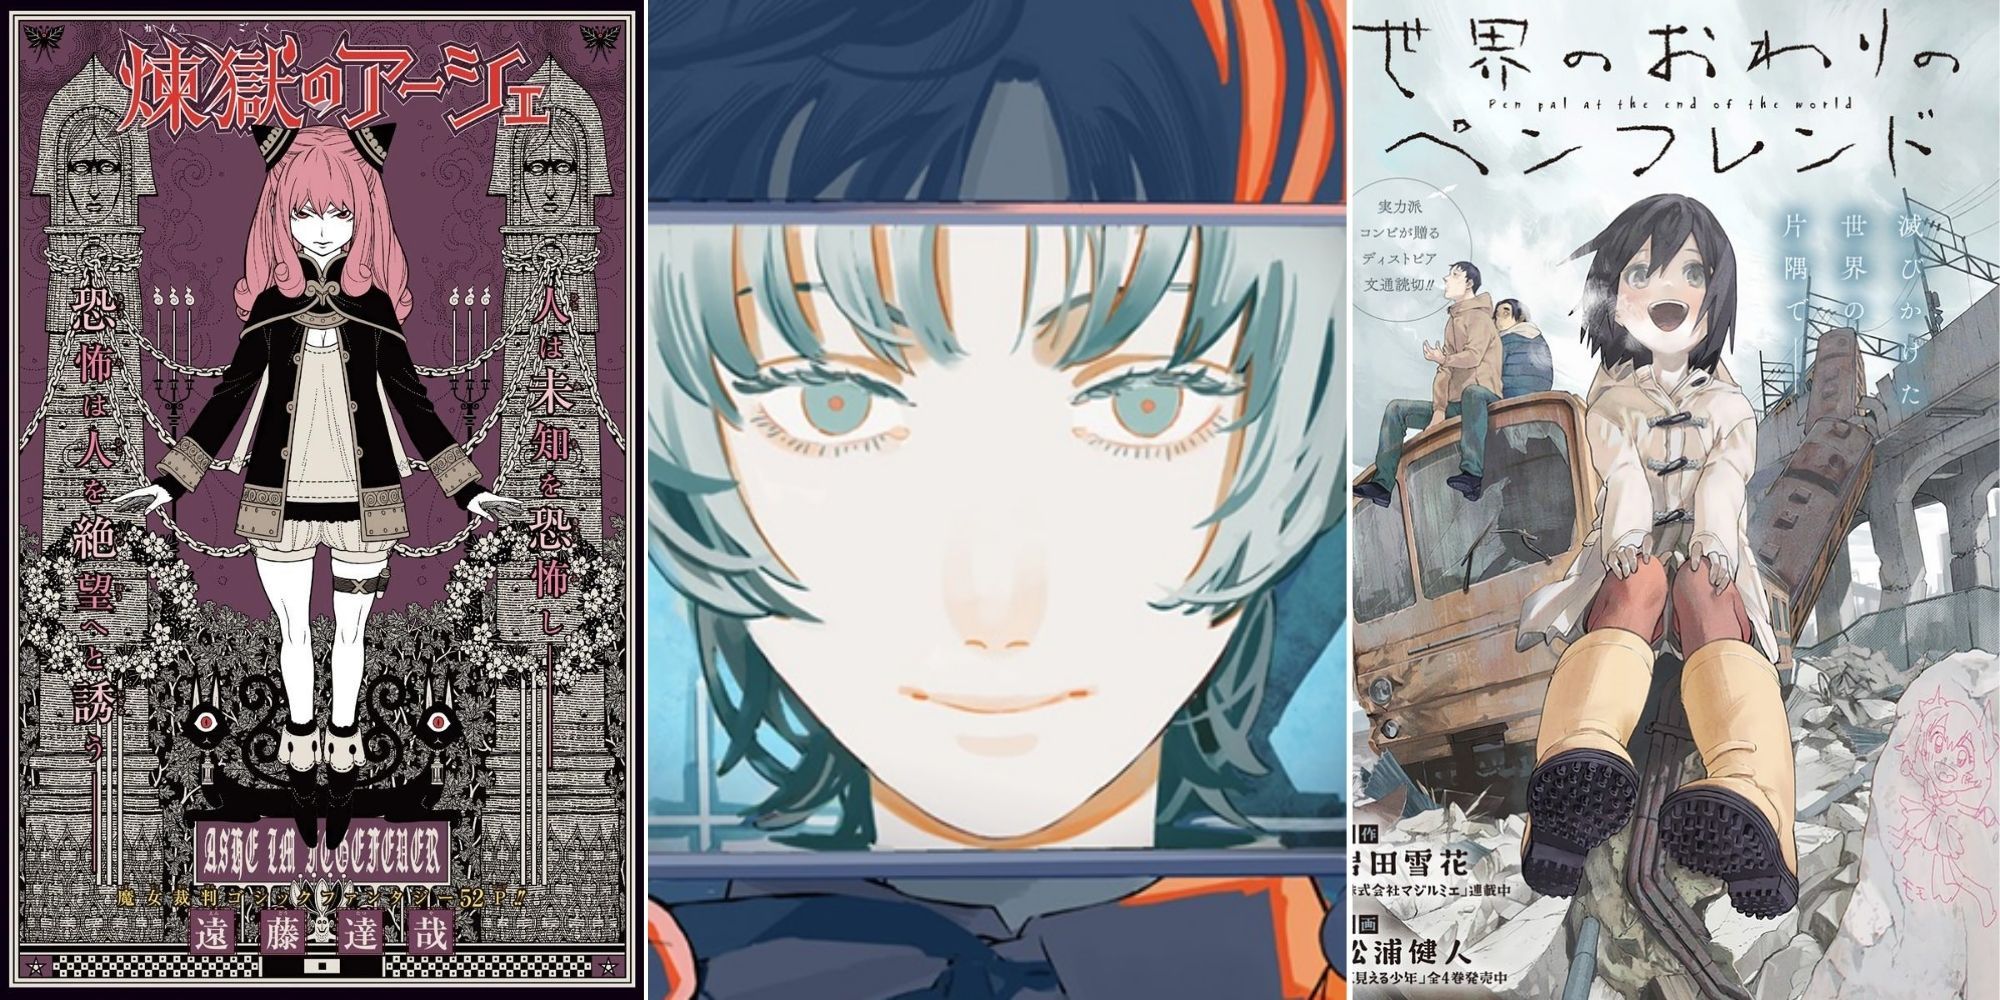 collage image of 3 manga covers; one featuring a pink haired girl in chains, one with a young girl seen through a camera lens, and one with a young girl smiling in the middle of a wrecked city